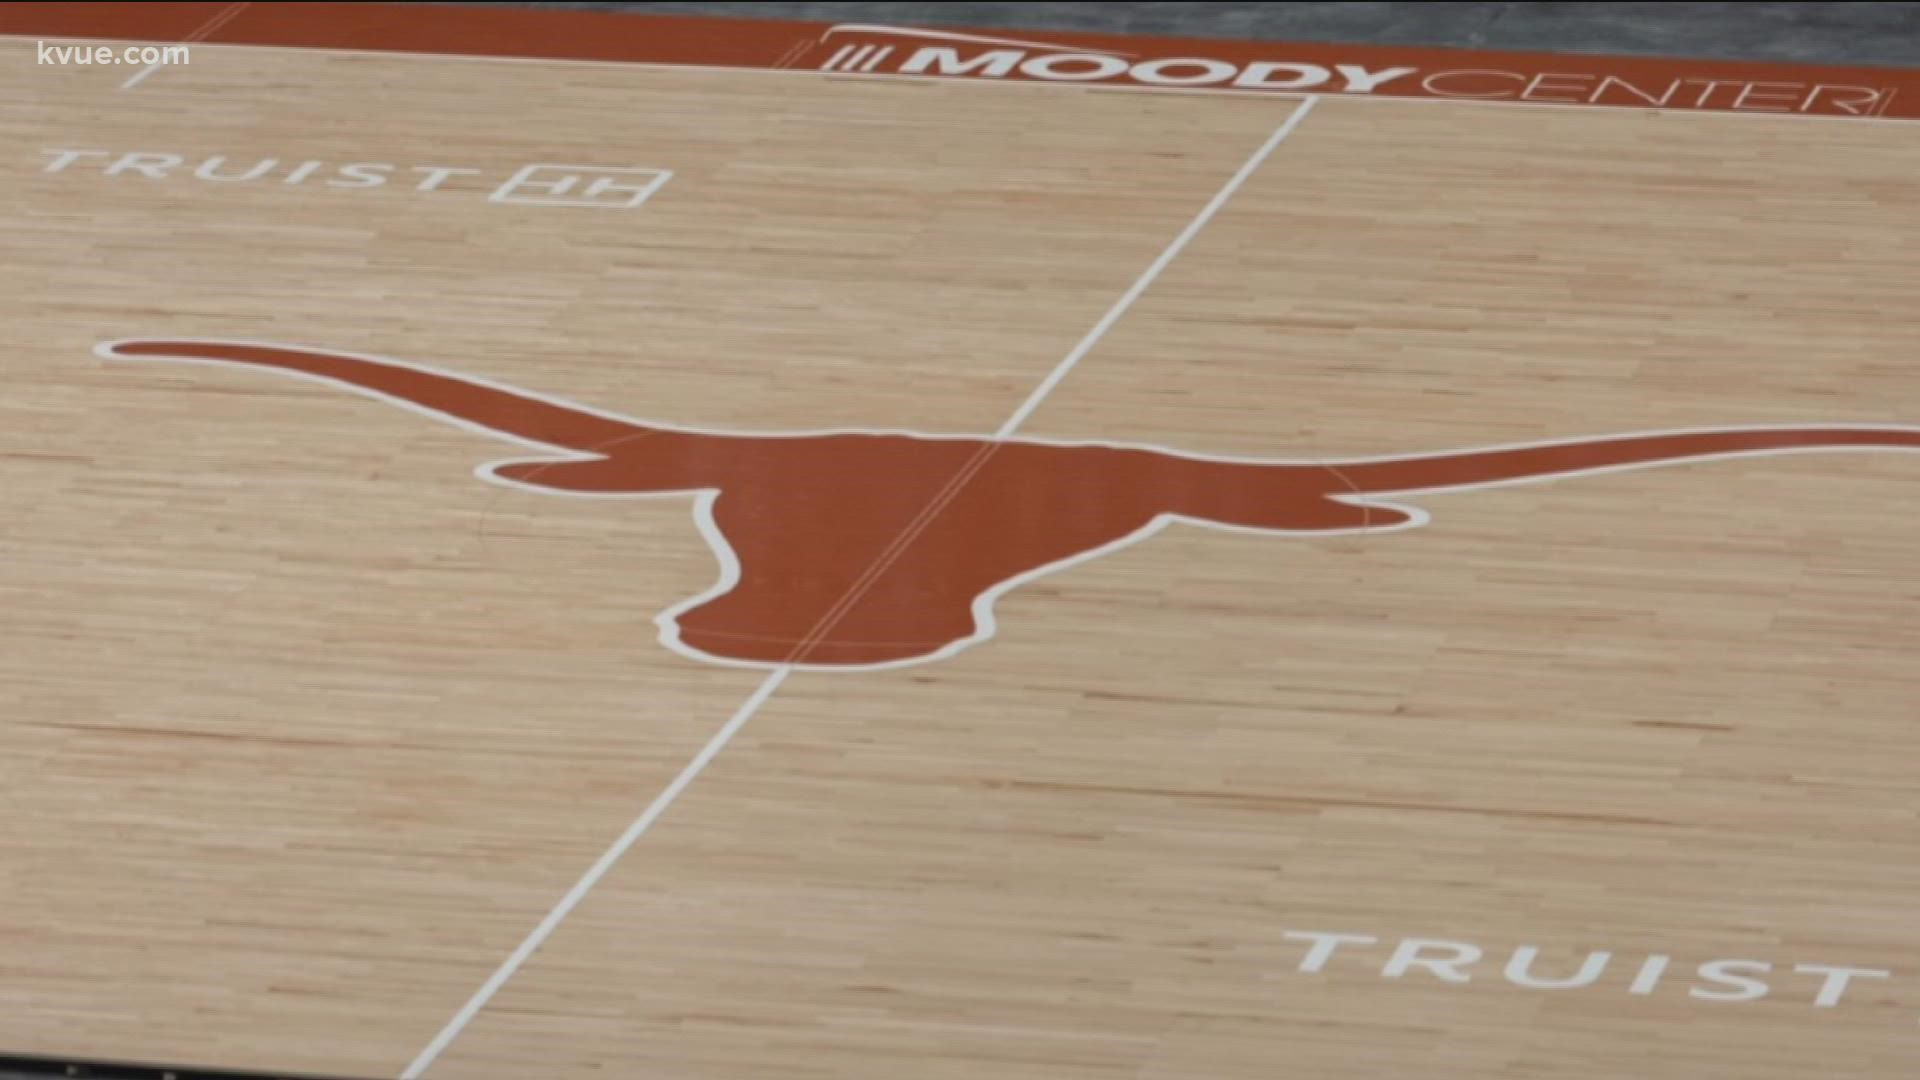 The Longhorns basketball teams will play their inaugural game at the center this fall.